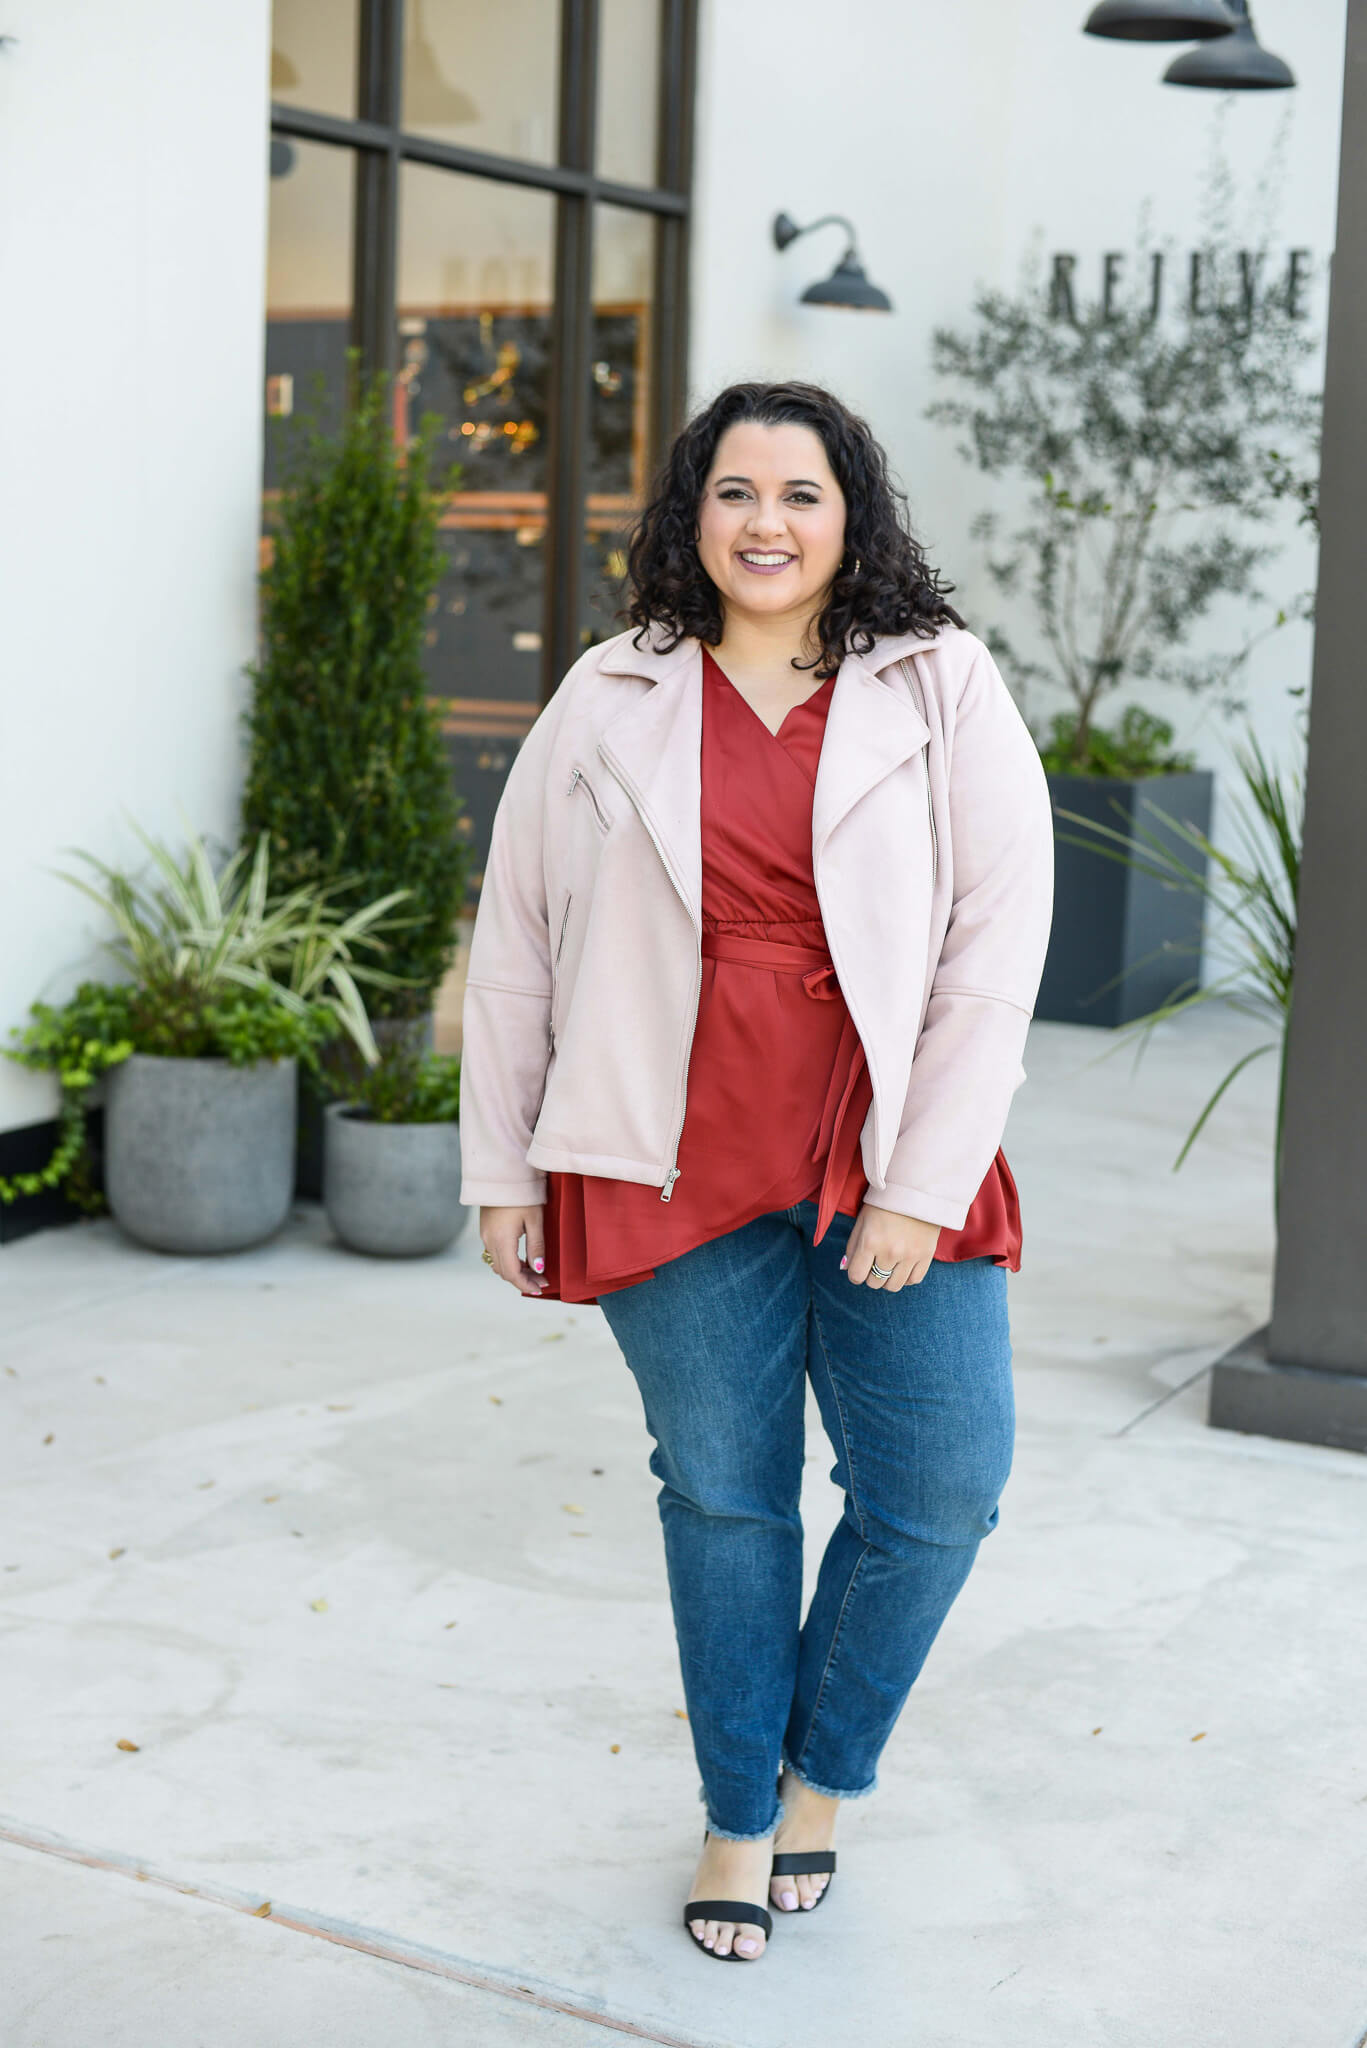 Lane Bryant plus size jeans are the perfect fit